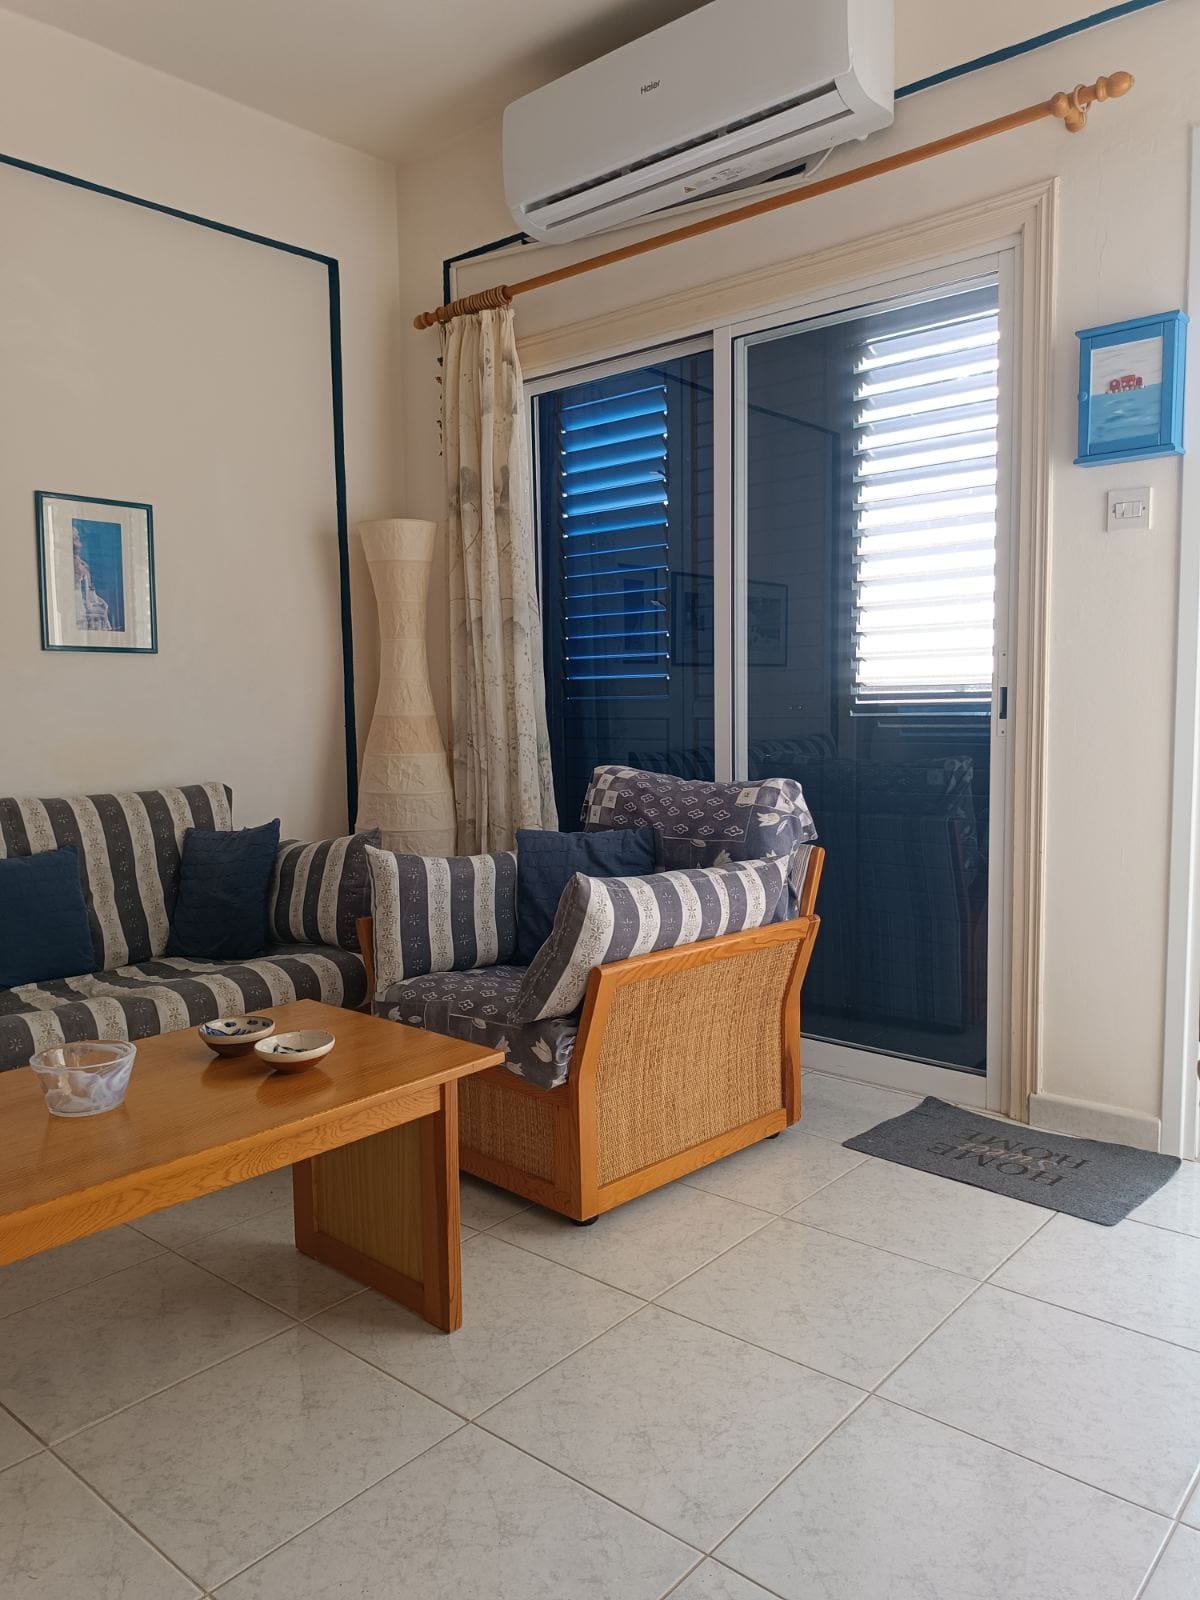 2 Bedroom House for Rent in Armou, Paphos District